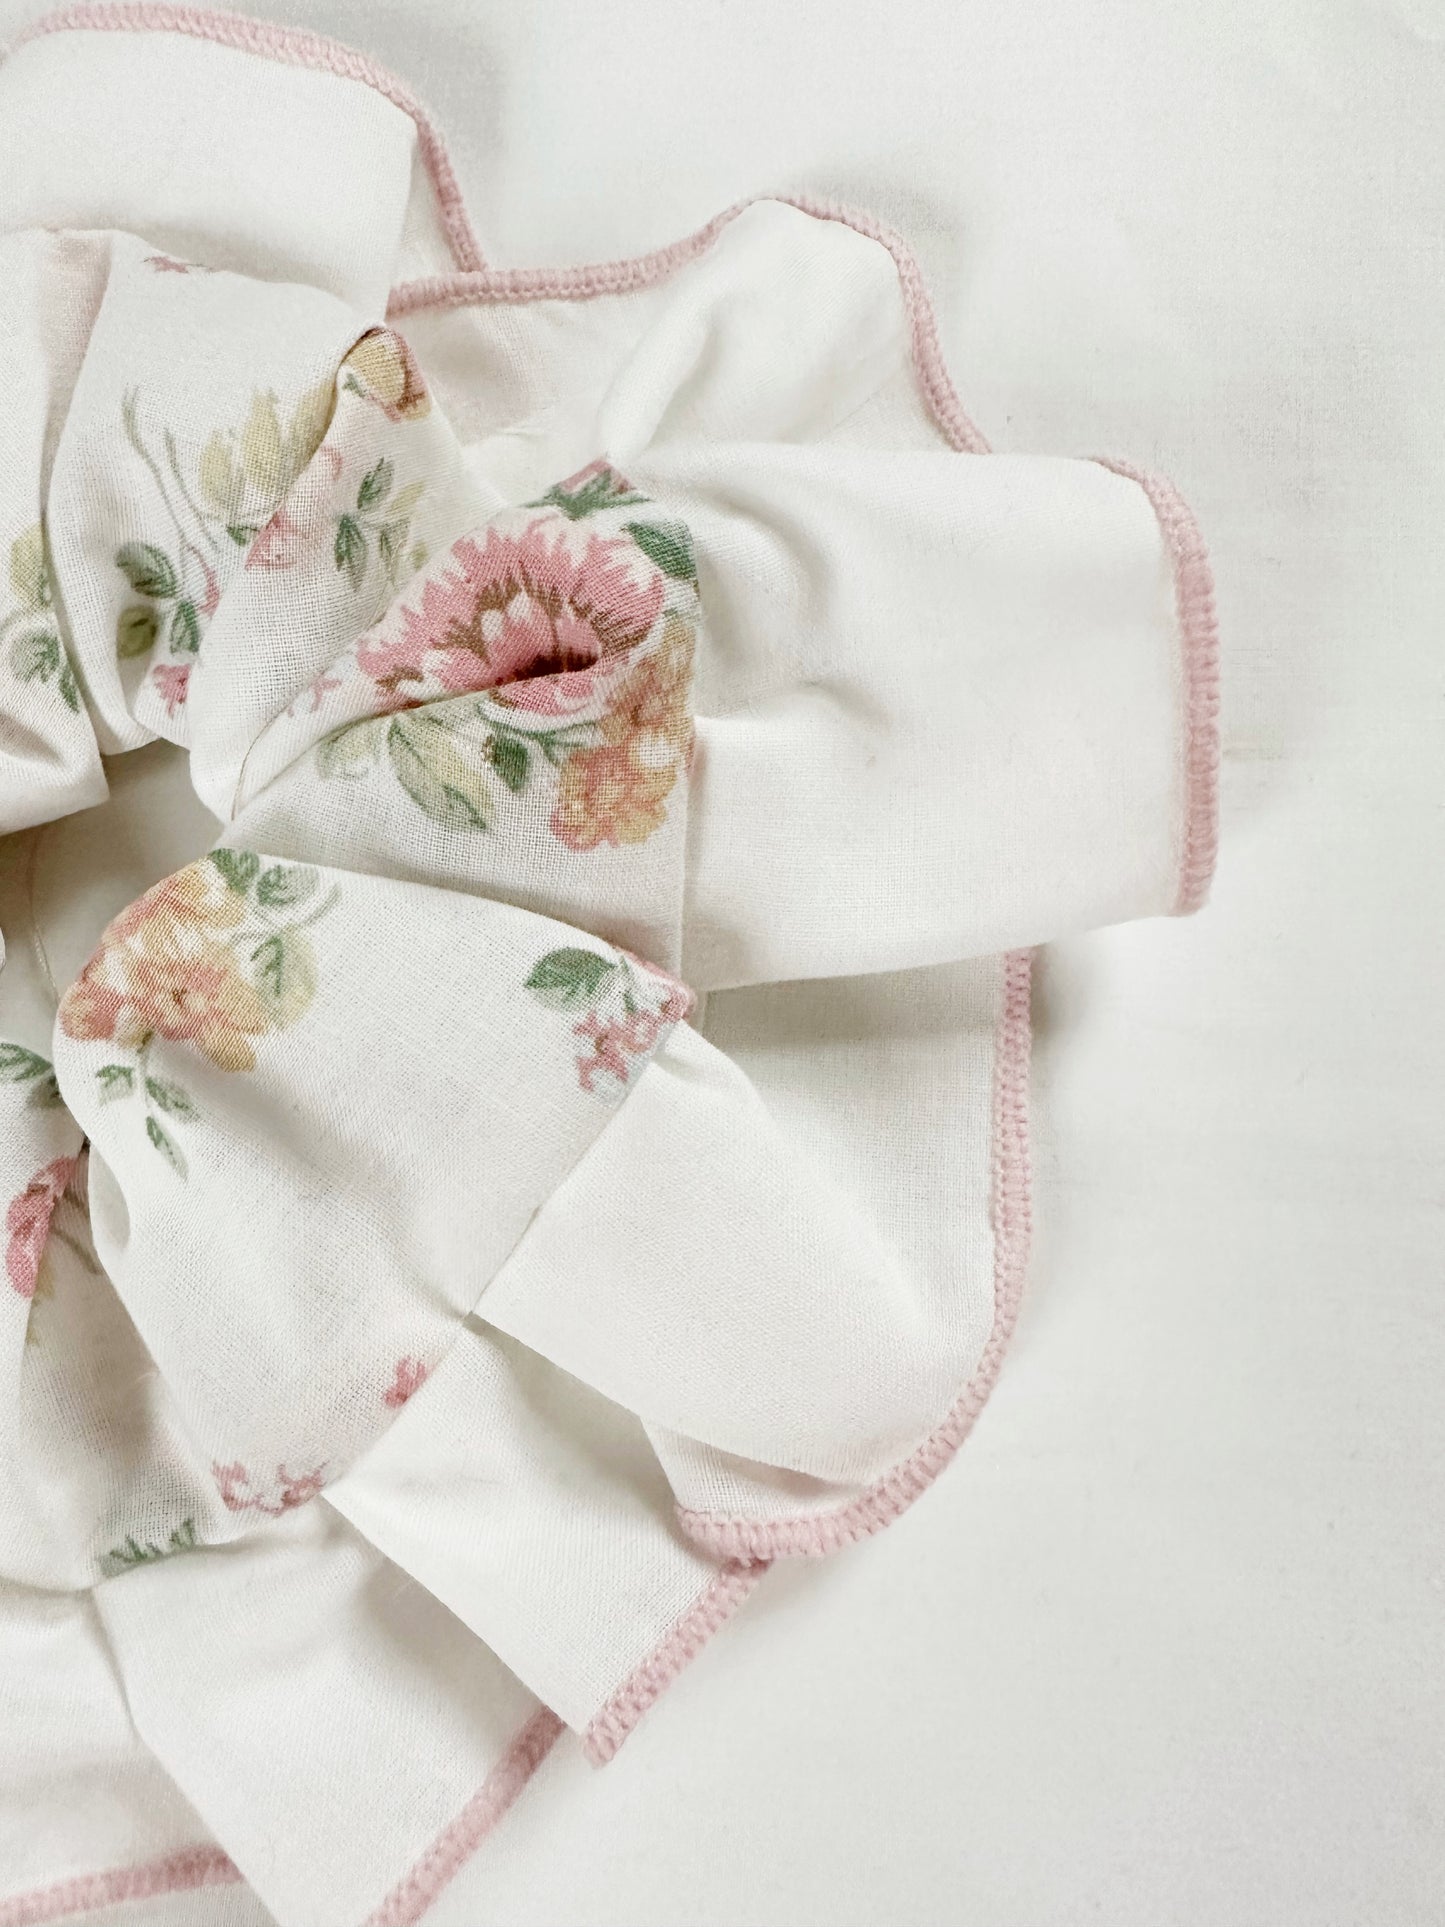 Oversized scrunchie in vintage floral cotton ruffle